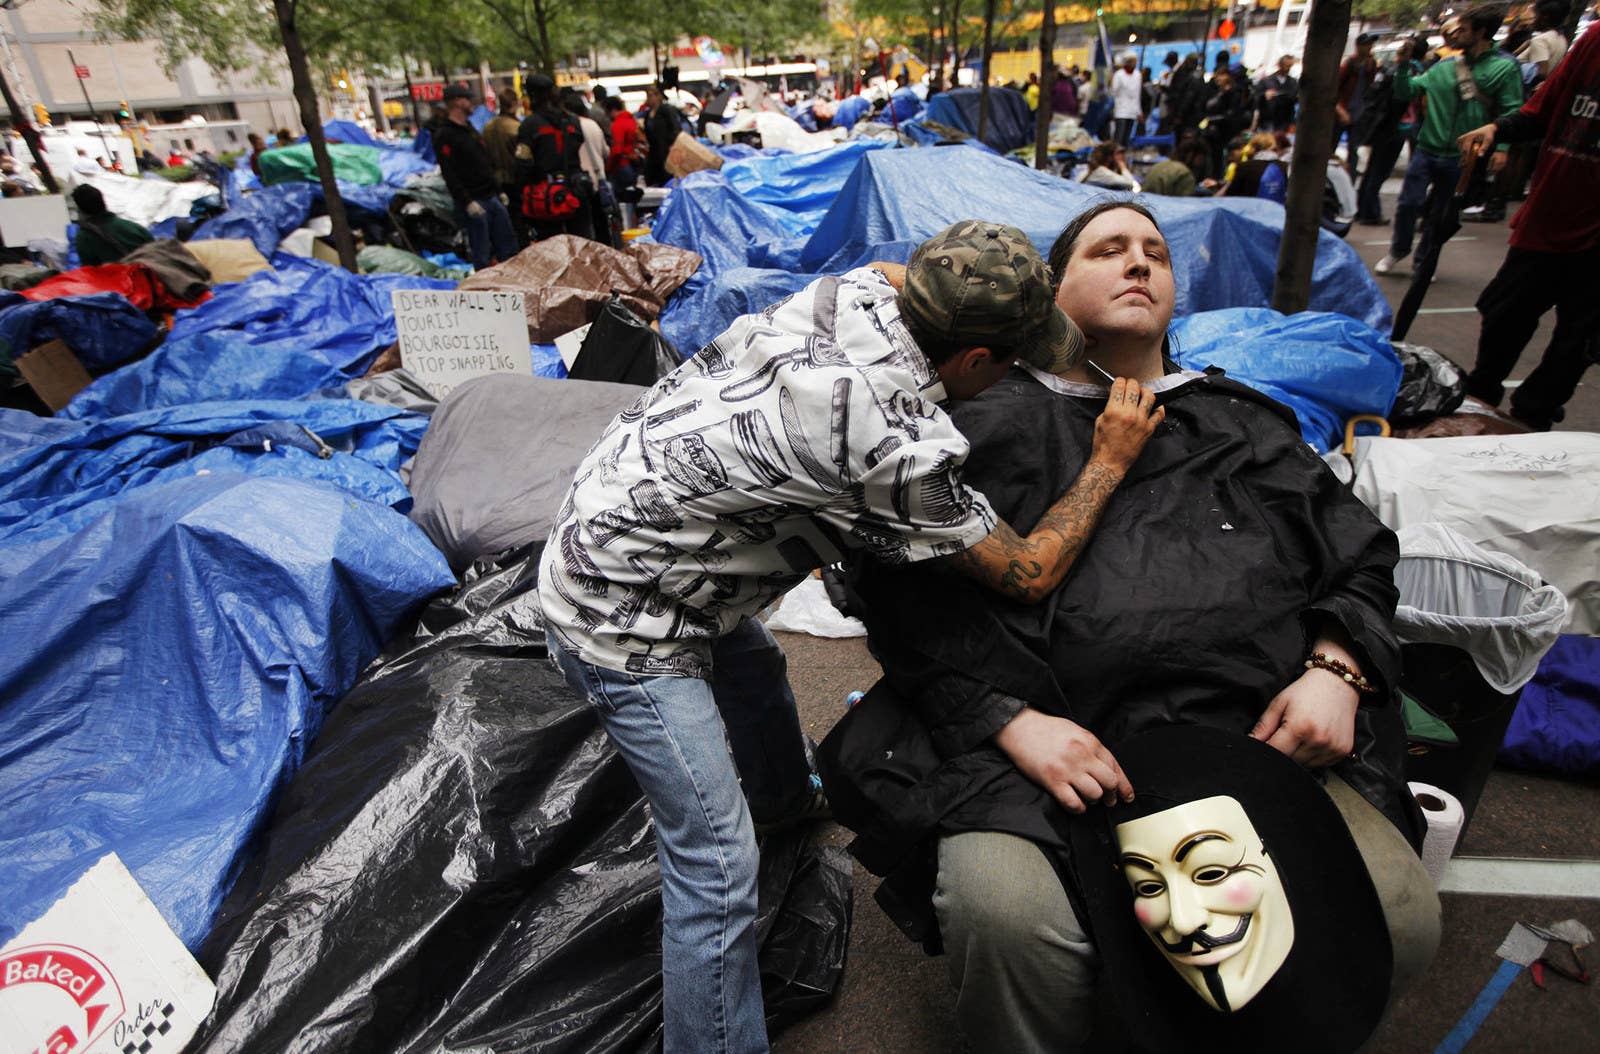 A member of the Occupy Wall Street movement gets a shave in Zuccotti Park on Oct. 12, 2011.